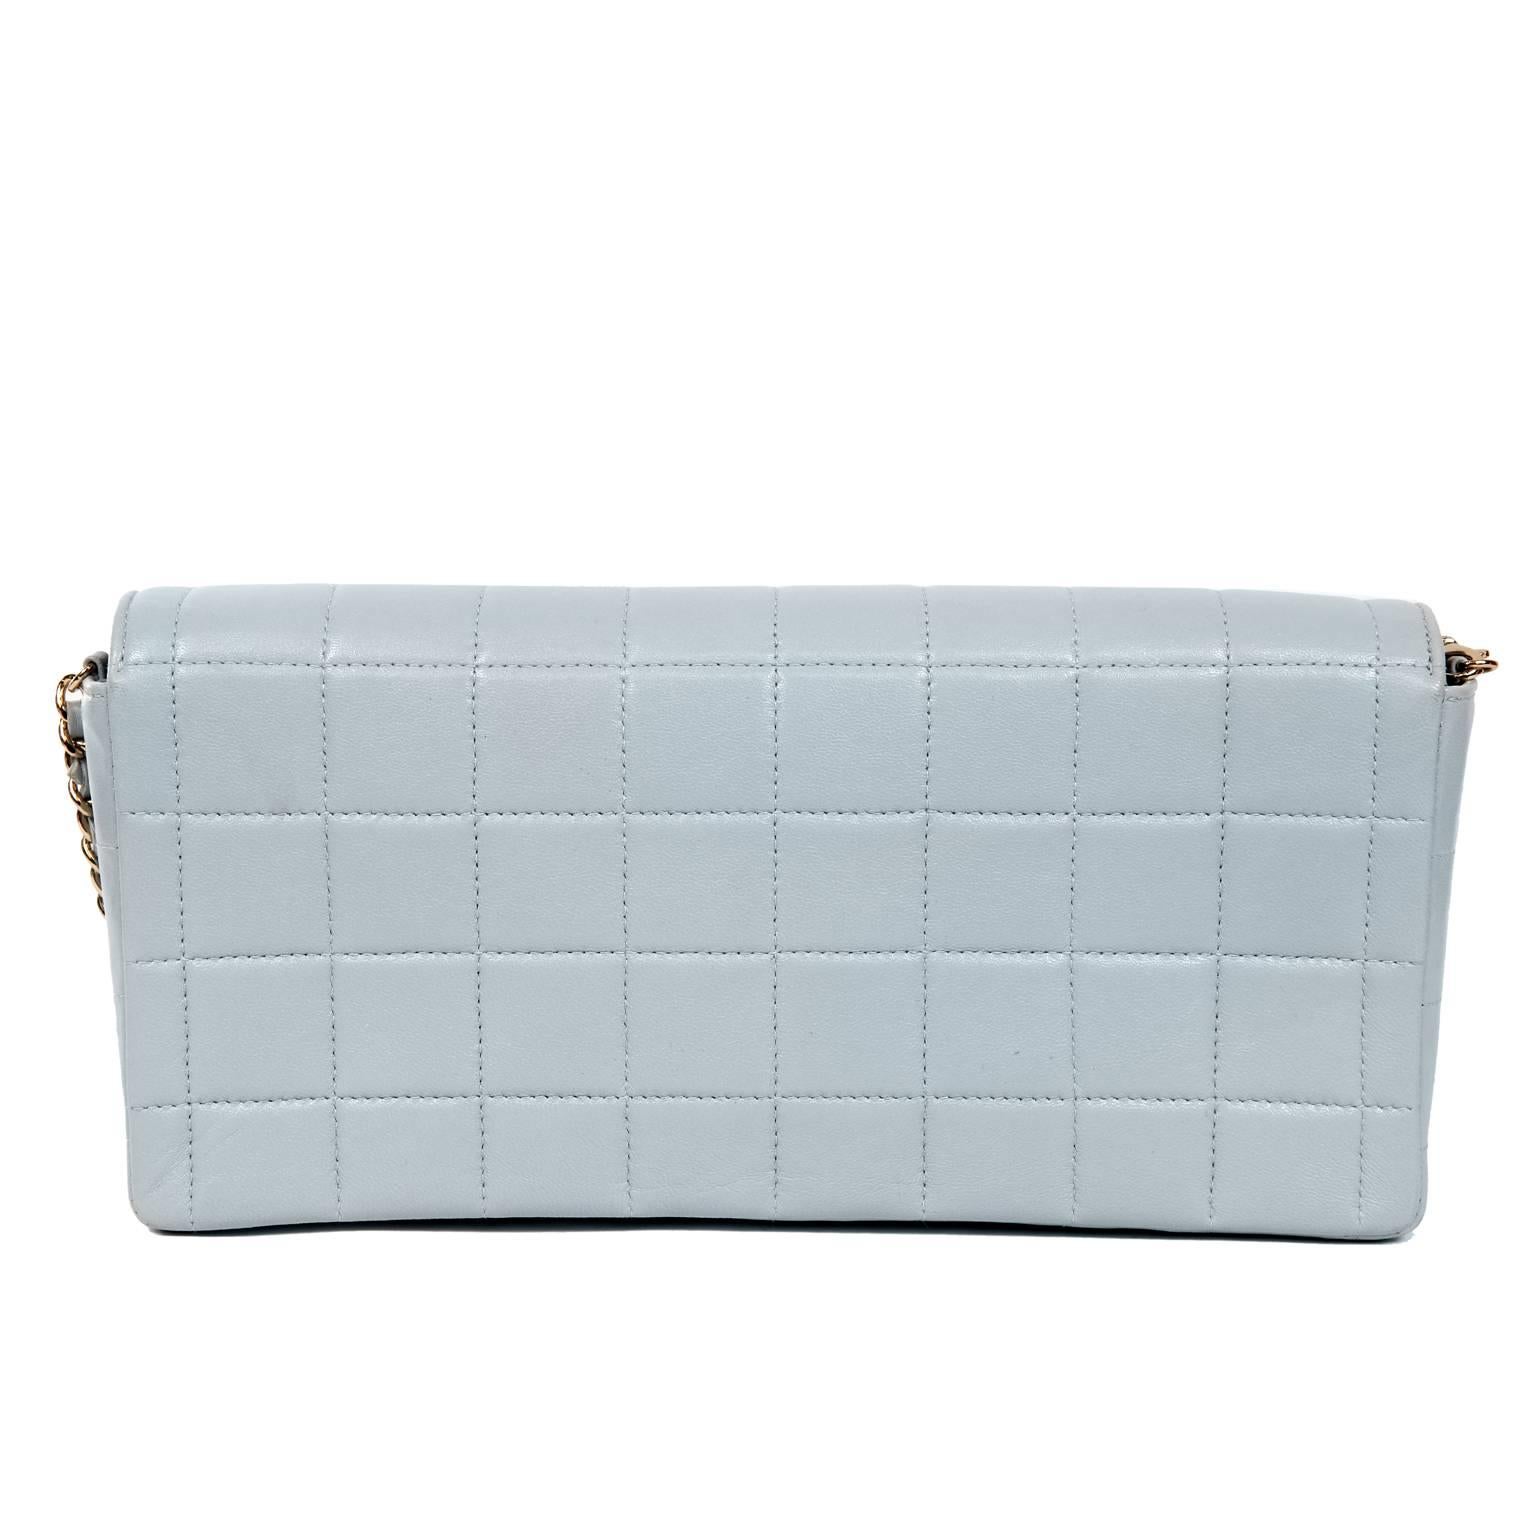 Chanel Light Blue Leather East West Flap Bag- Excellent Plus Condition
 Simply designed with an optional shoulder strap, the unique color and square quilting makes it a stand out piece.
Pale blue leather is quilted in square pattern with gold